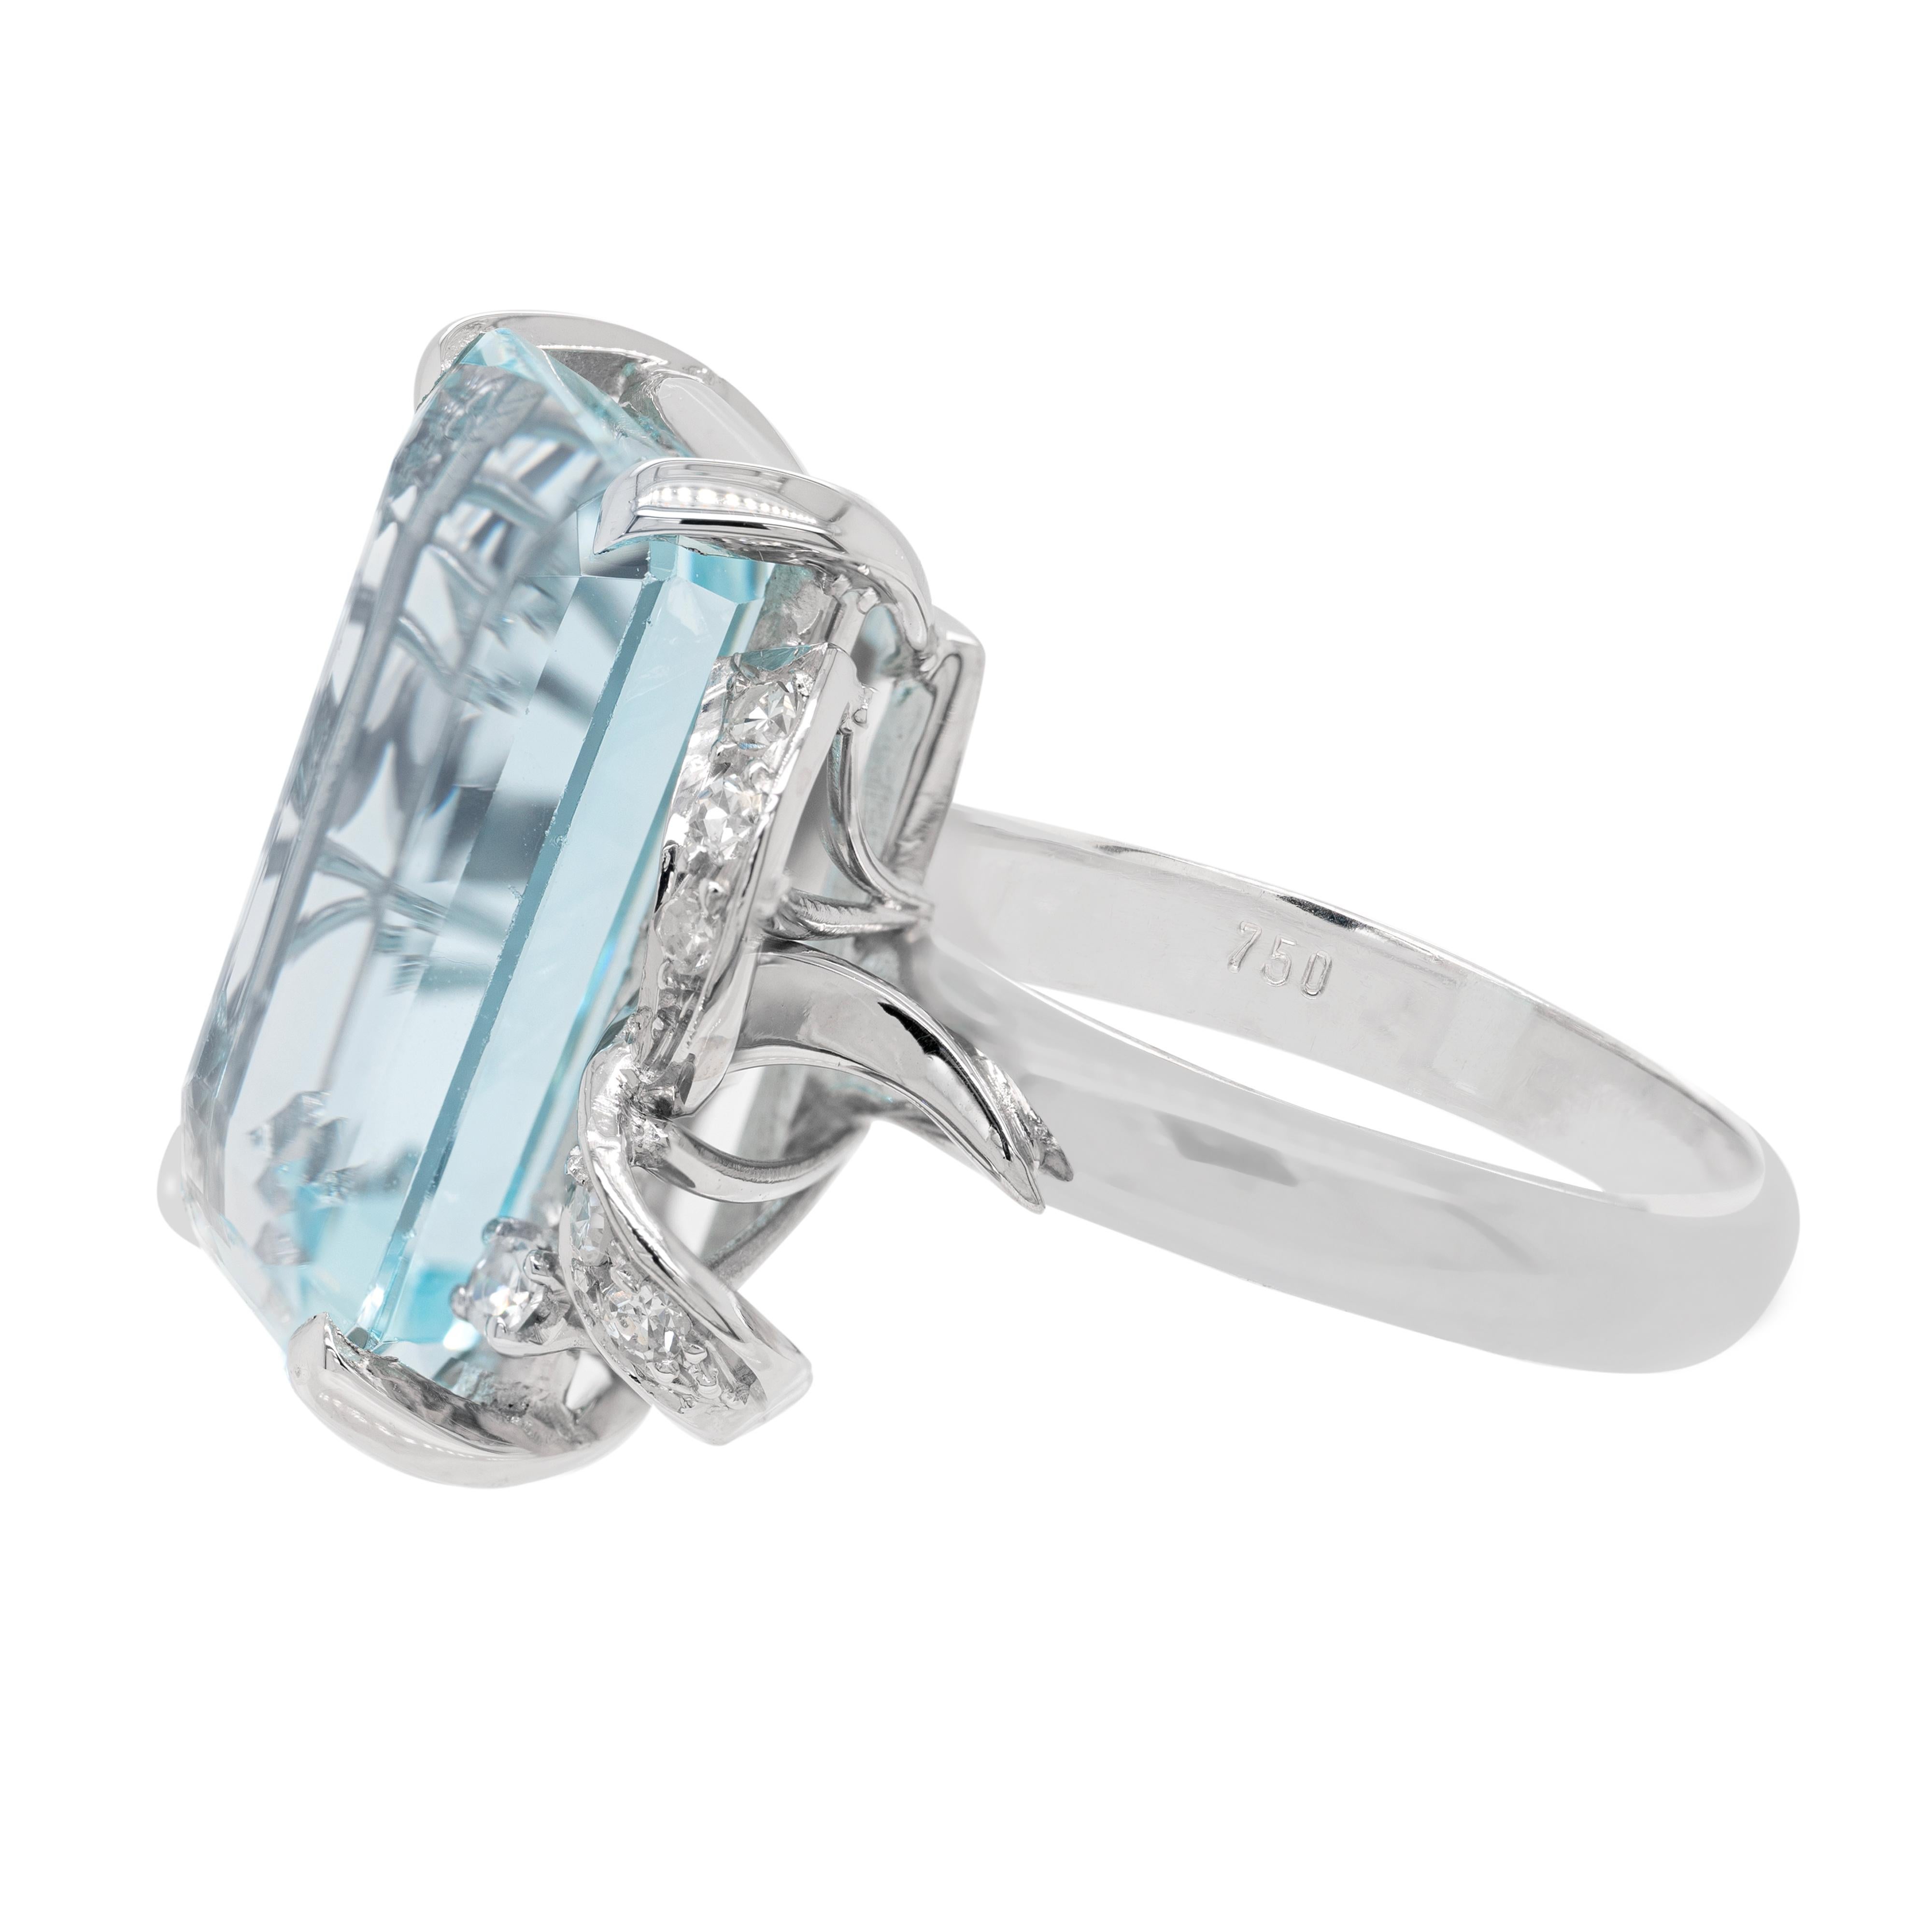 This wonderful 18 carat white gold dress ring features an emerald cut aquamarine weighing approximately 13.00 carats, mounted in a four claw, open back setting. The impressive stone is accompanied by two white gold ribbons on either side, each